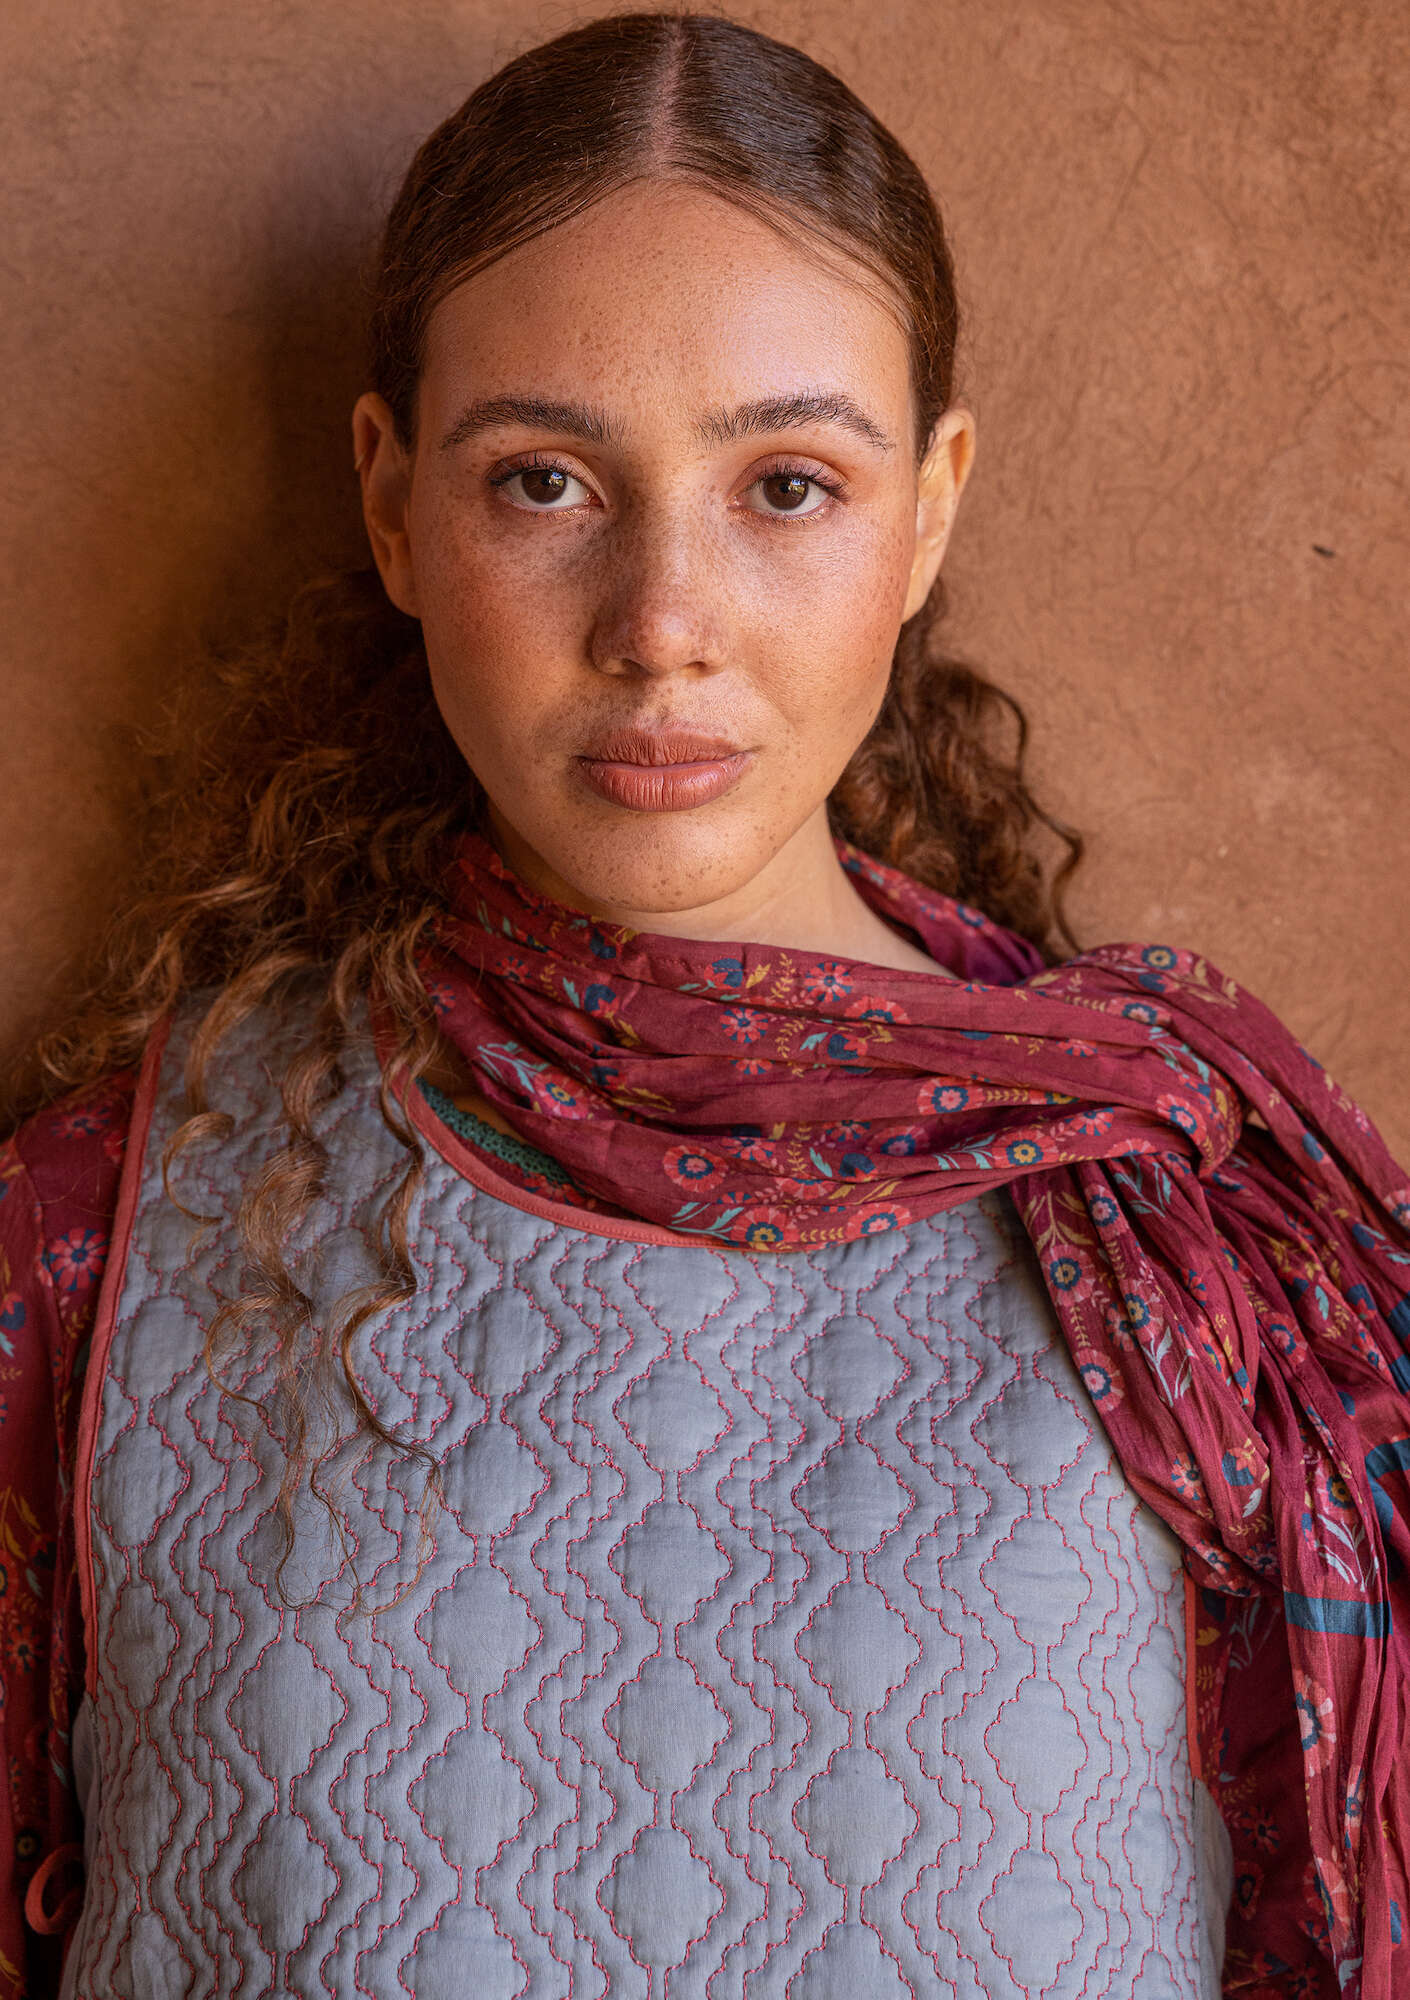 “Noor” quilted vest in organic cotton brick thumbnail